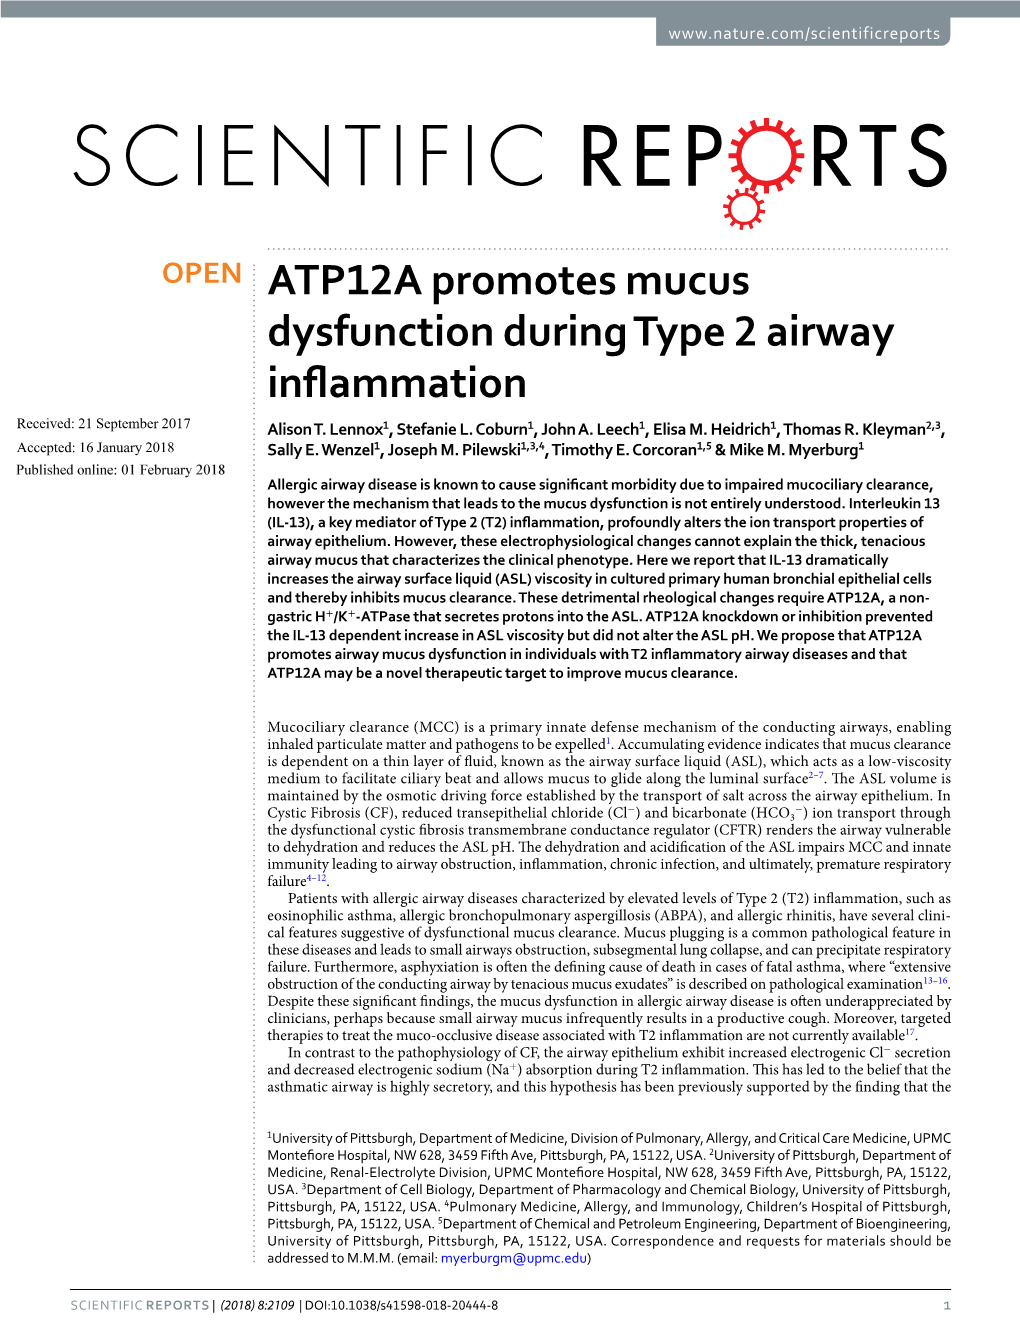 ATP12A Promotes Mucus Dysfunction During Type 2 Airway Inflammation